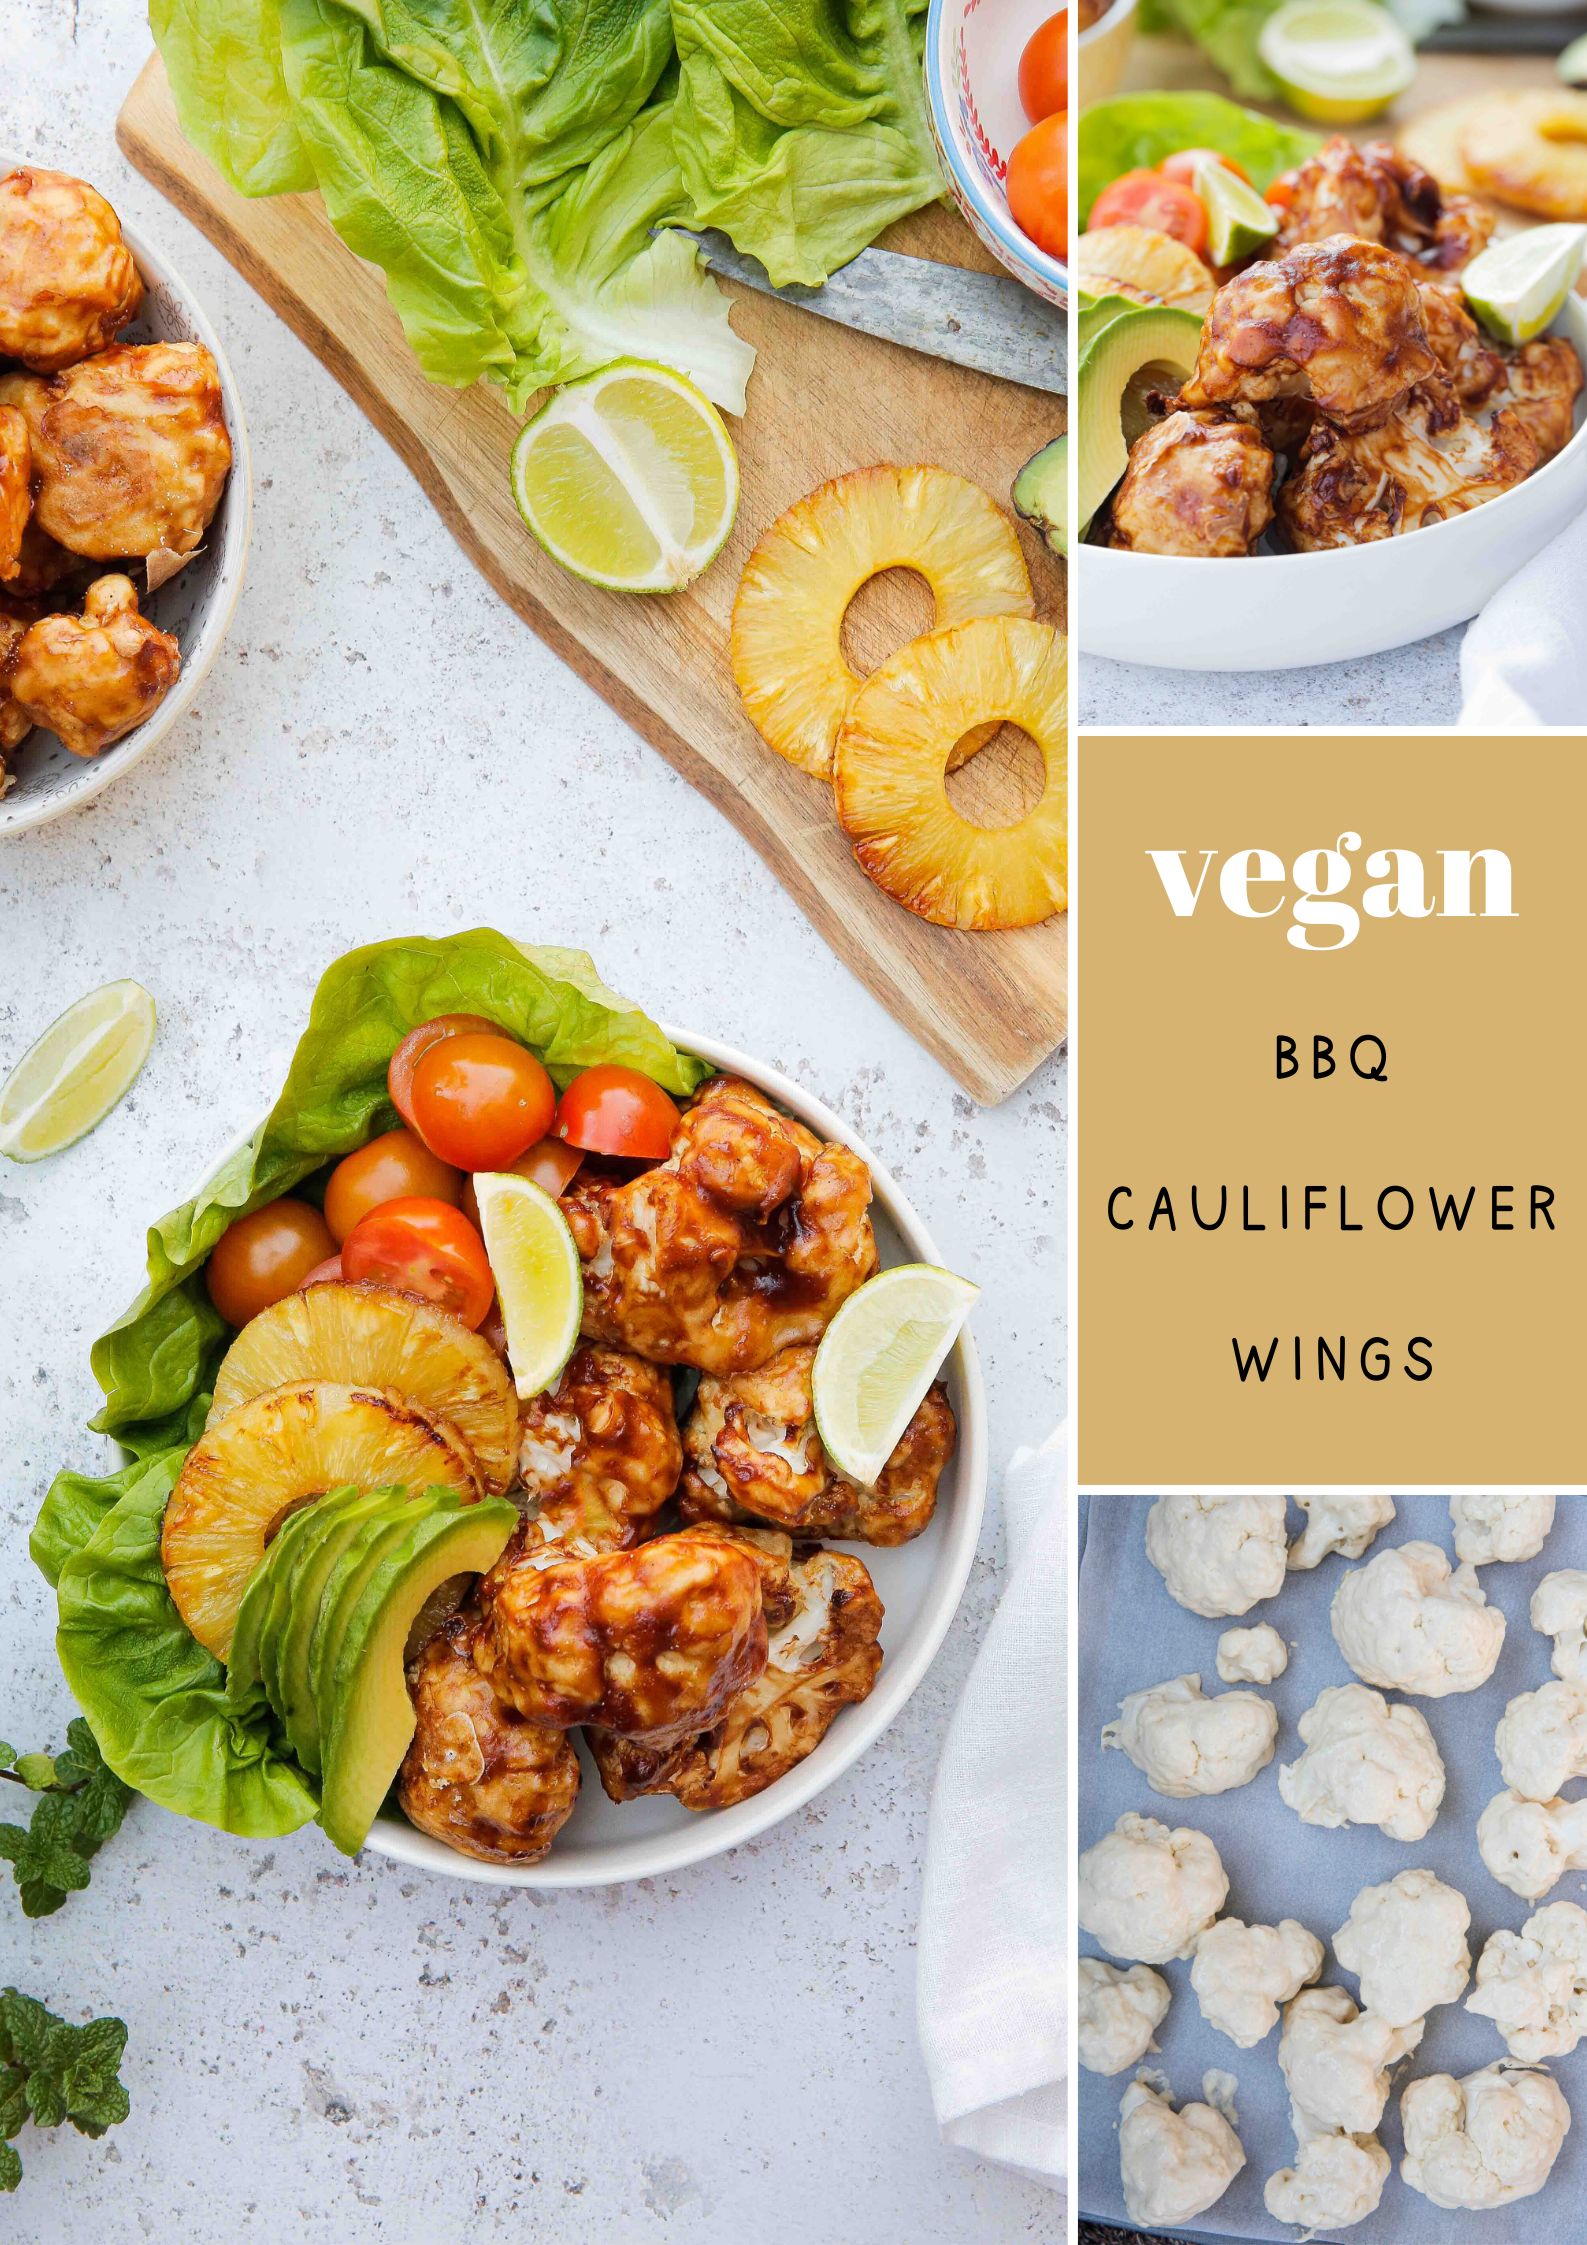 A little bit spicy and full of flavour, these meat free BBQ cauliflower wings are great for both feeding a crowd or a solo movie marathon! Recipe on thecookandhim.com | #cauliflowerwings #veganwings #bbqsauce #cauliflowerrecipes #bbqcauliflower #veganrecipes #meatfreerecipes